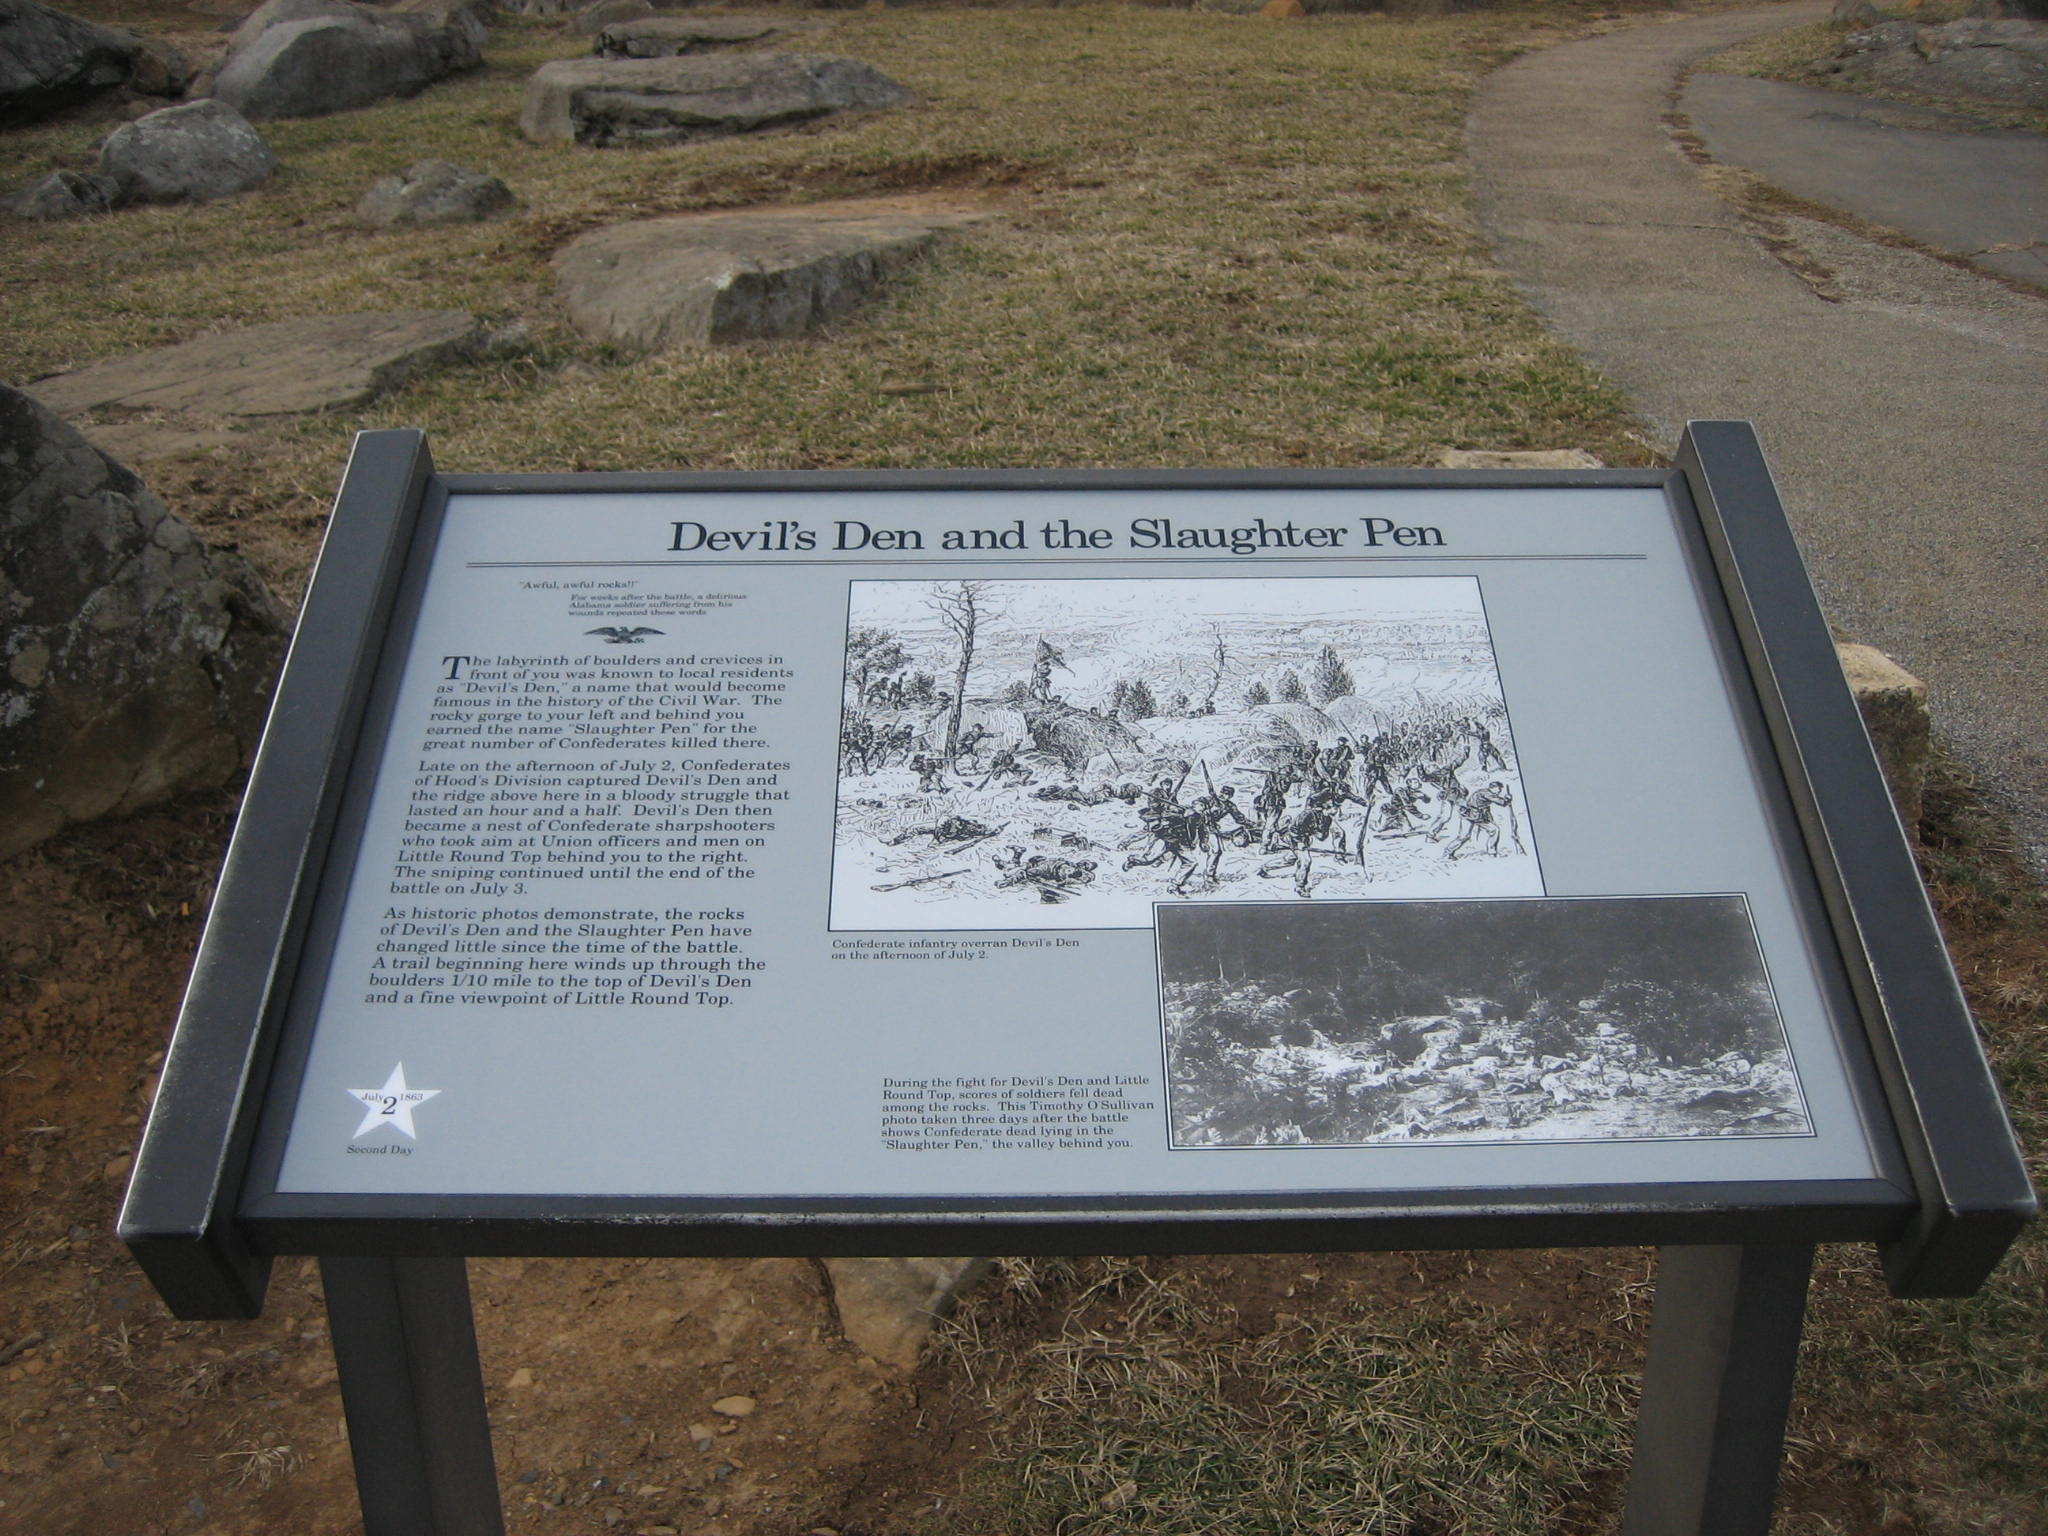 Sharpshooter's View of Little Round Top from the Devil's Den